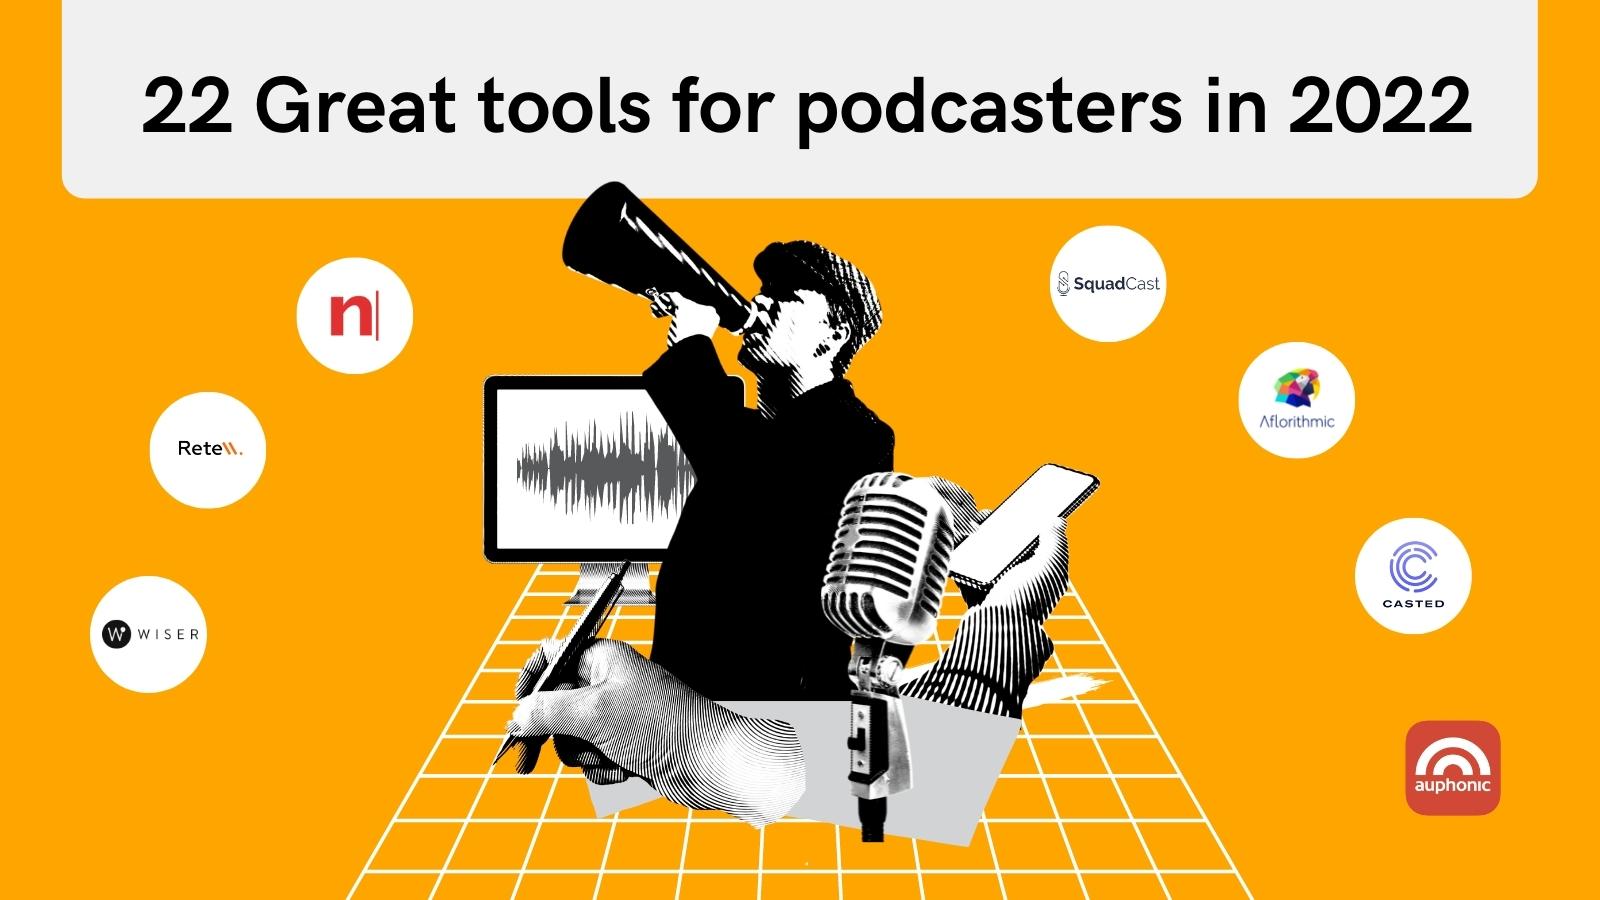 22 great podcasting tools in 2022 by Auphonic